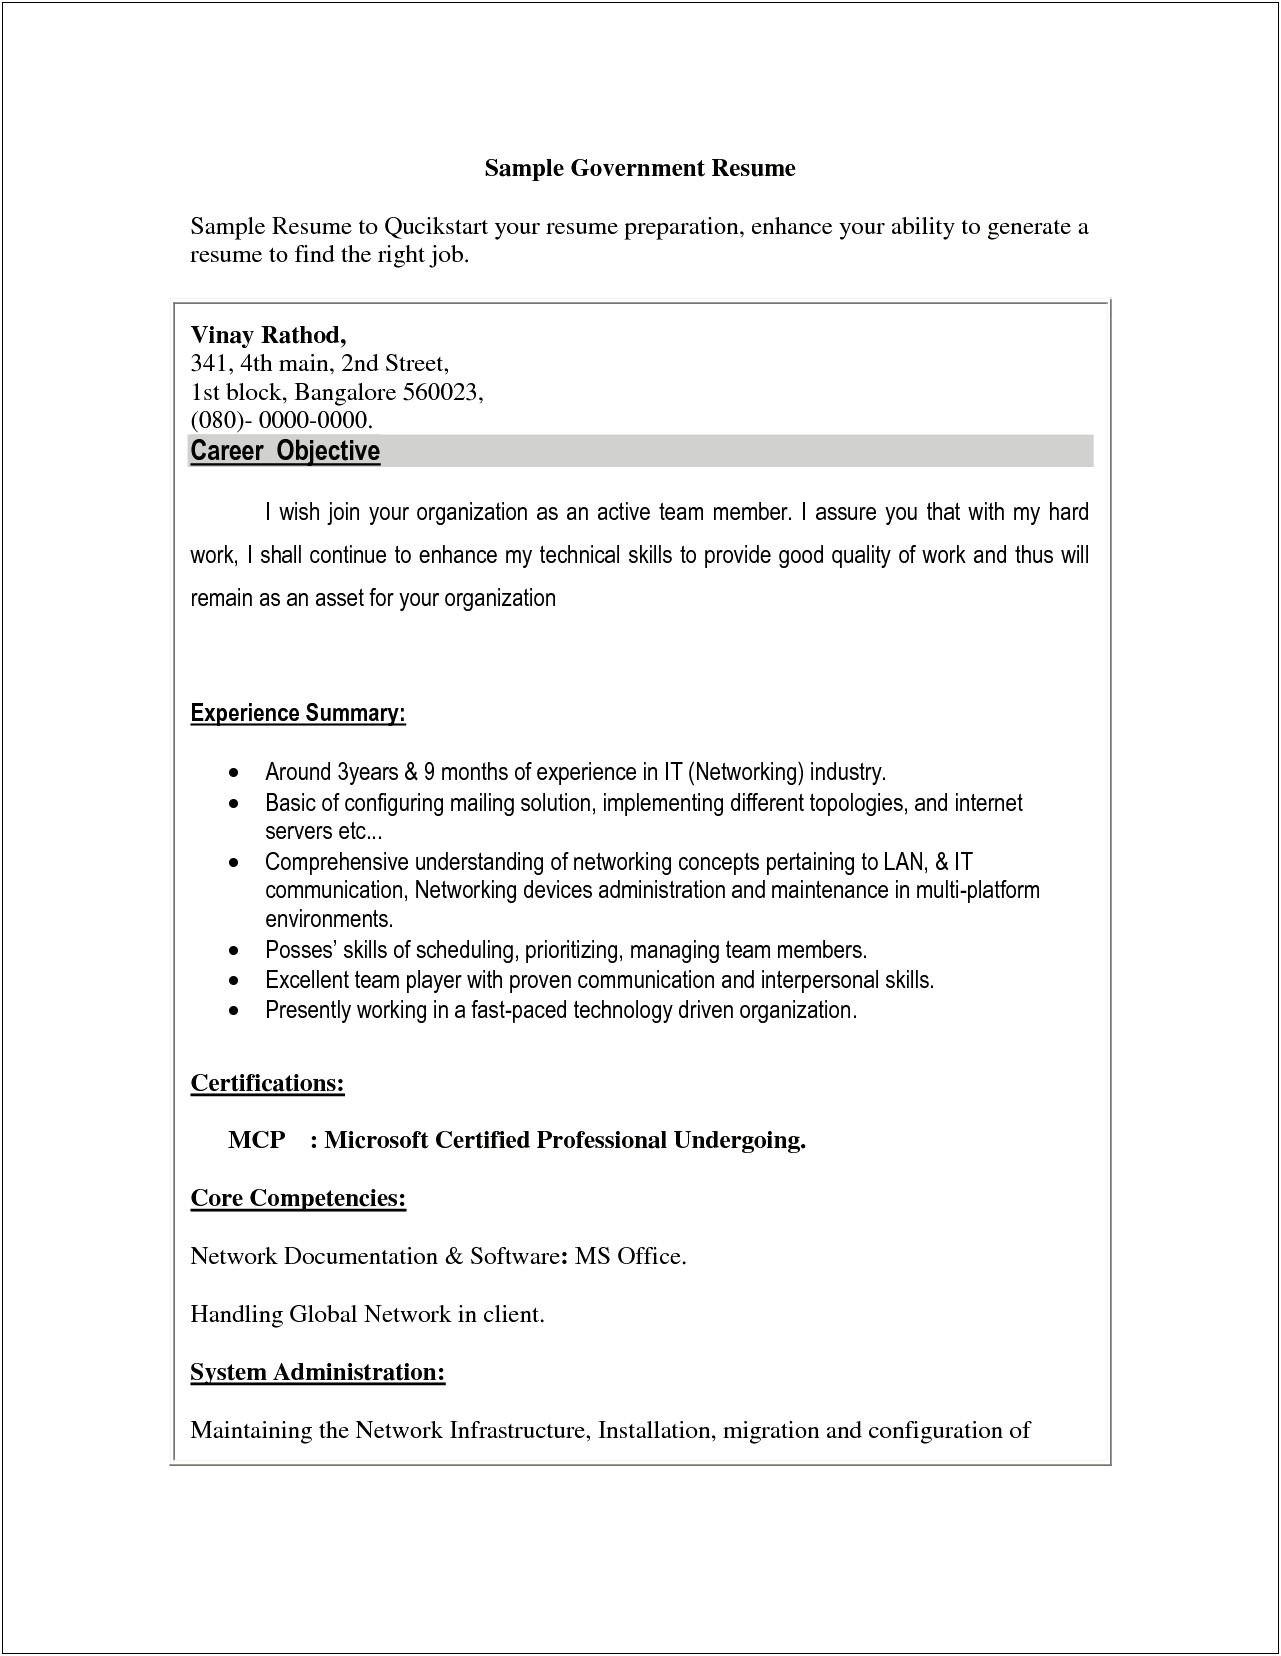 Free Sample Resume For Government Jobs